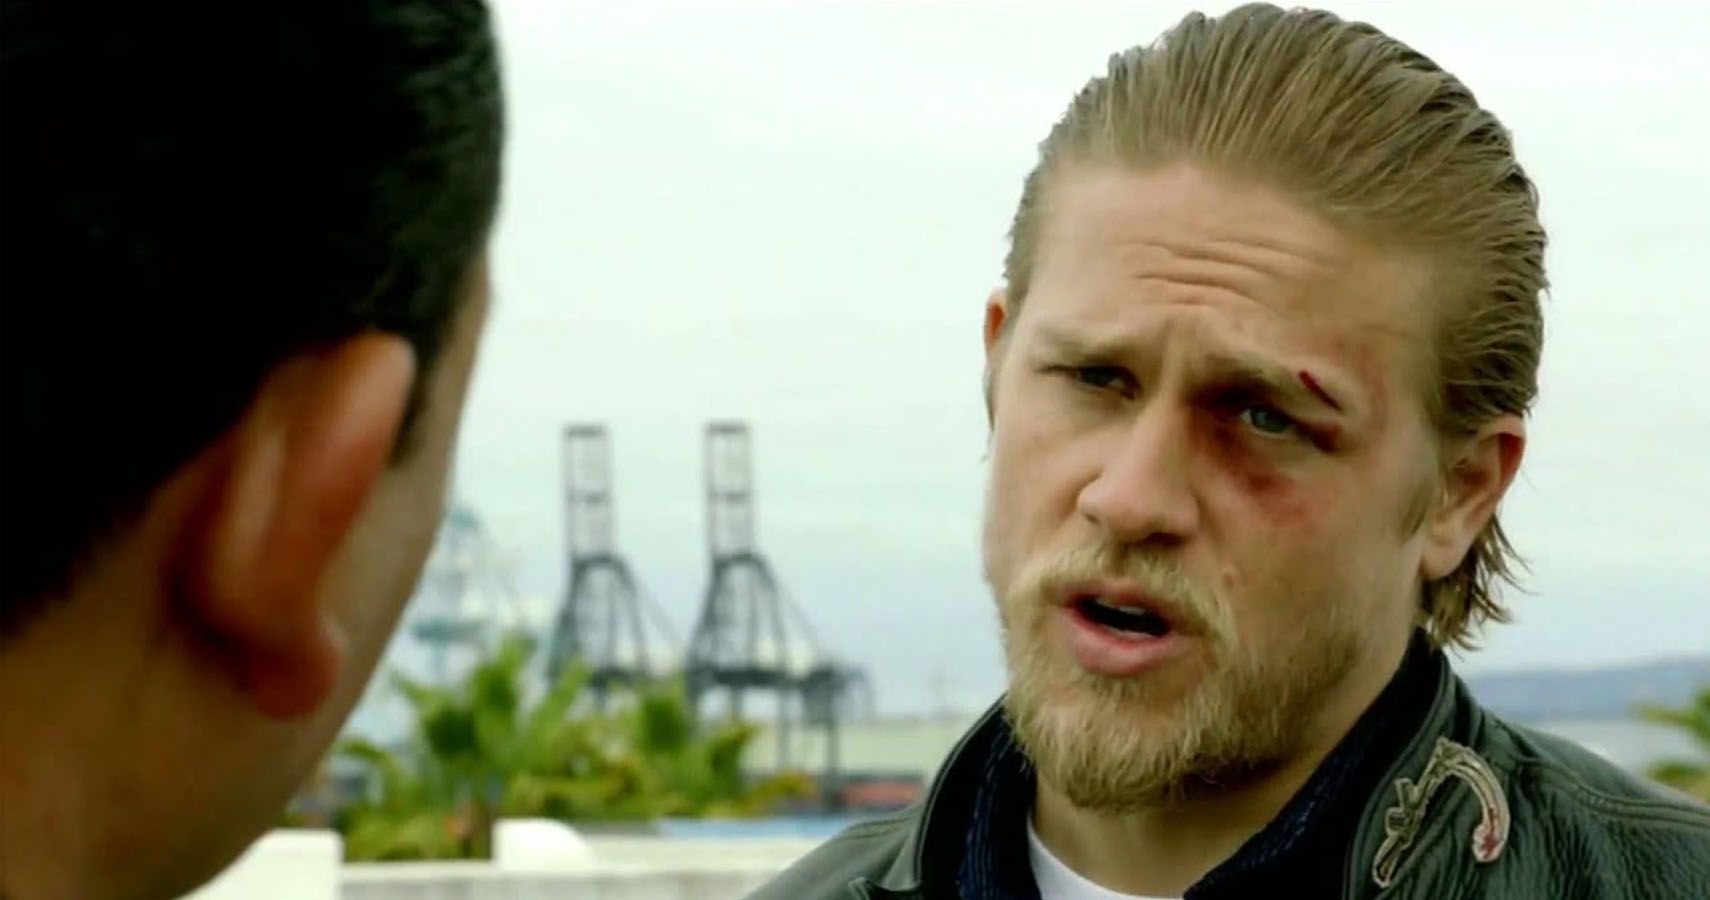 Sons Of Anarchy 10 Worst Episodes From Season 5 According To Imdb